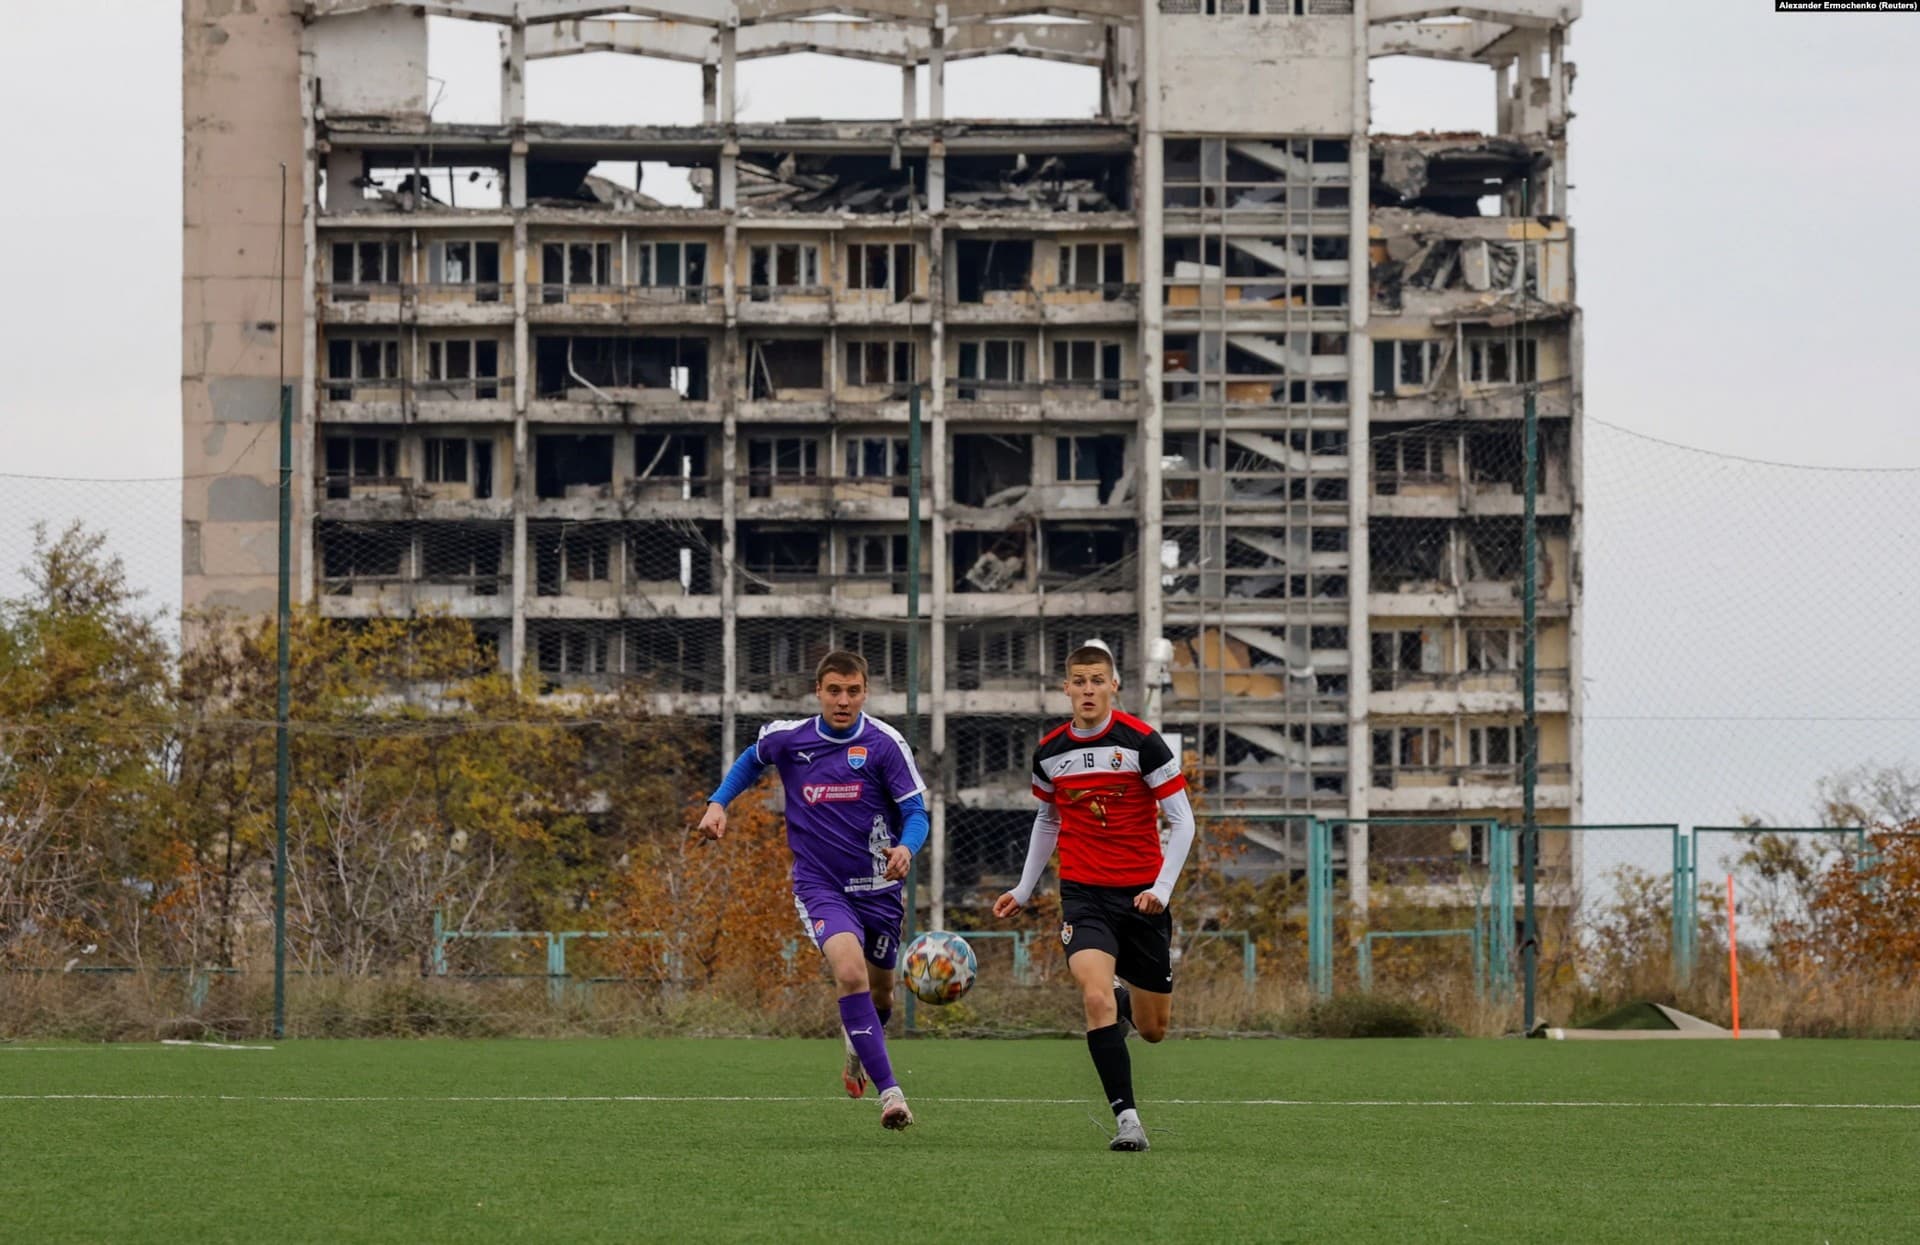 Football players train in front of a heavily damaged building